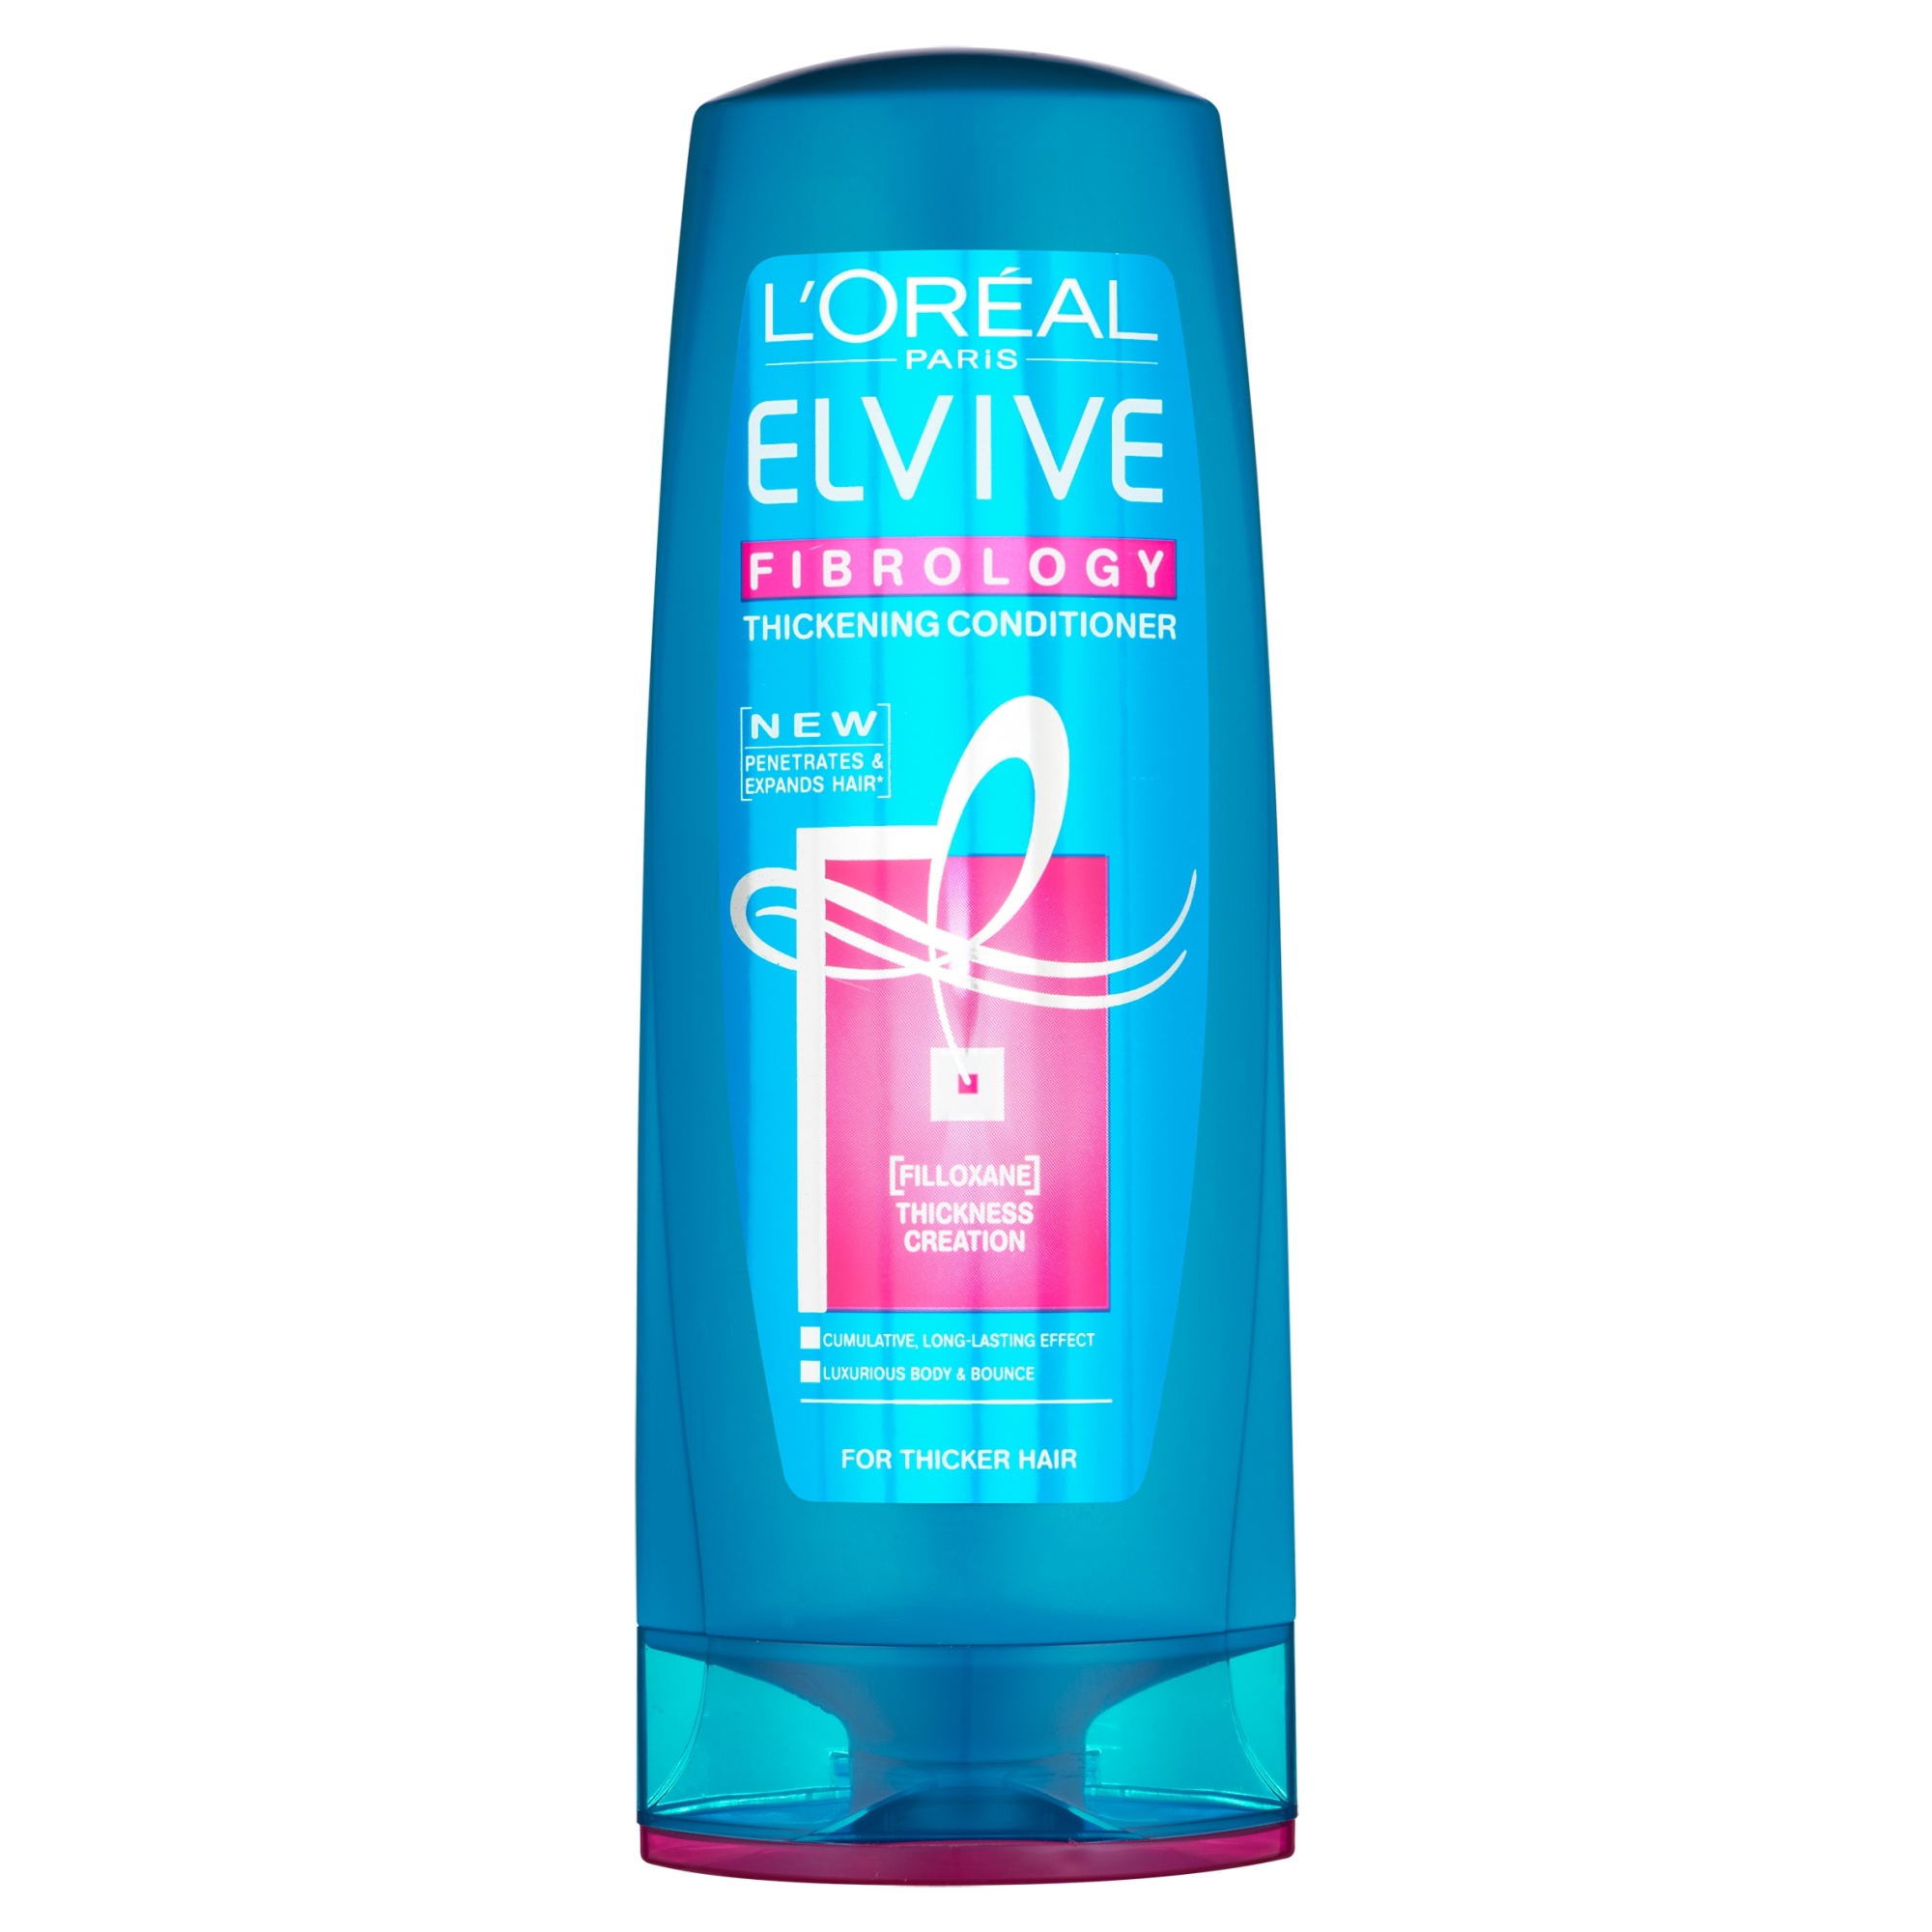 L'Oreal Paris Elvive Fibrology Thickening Conditioner